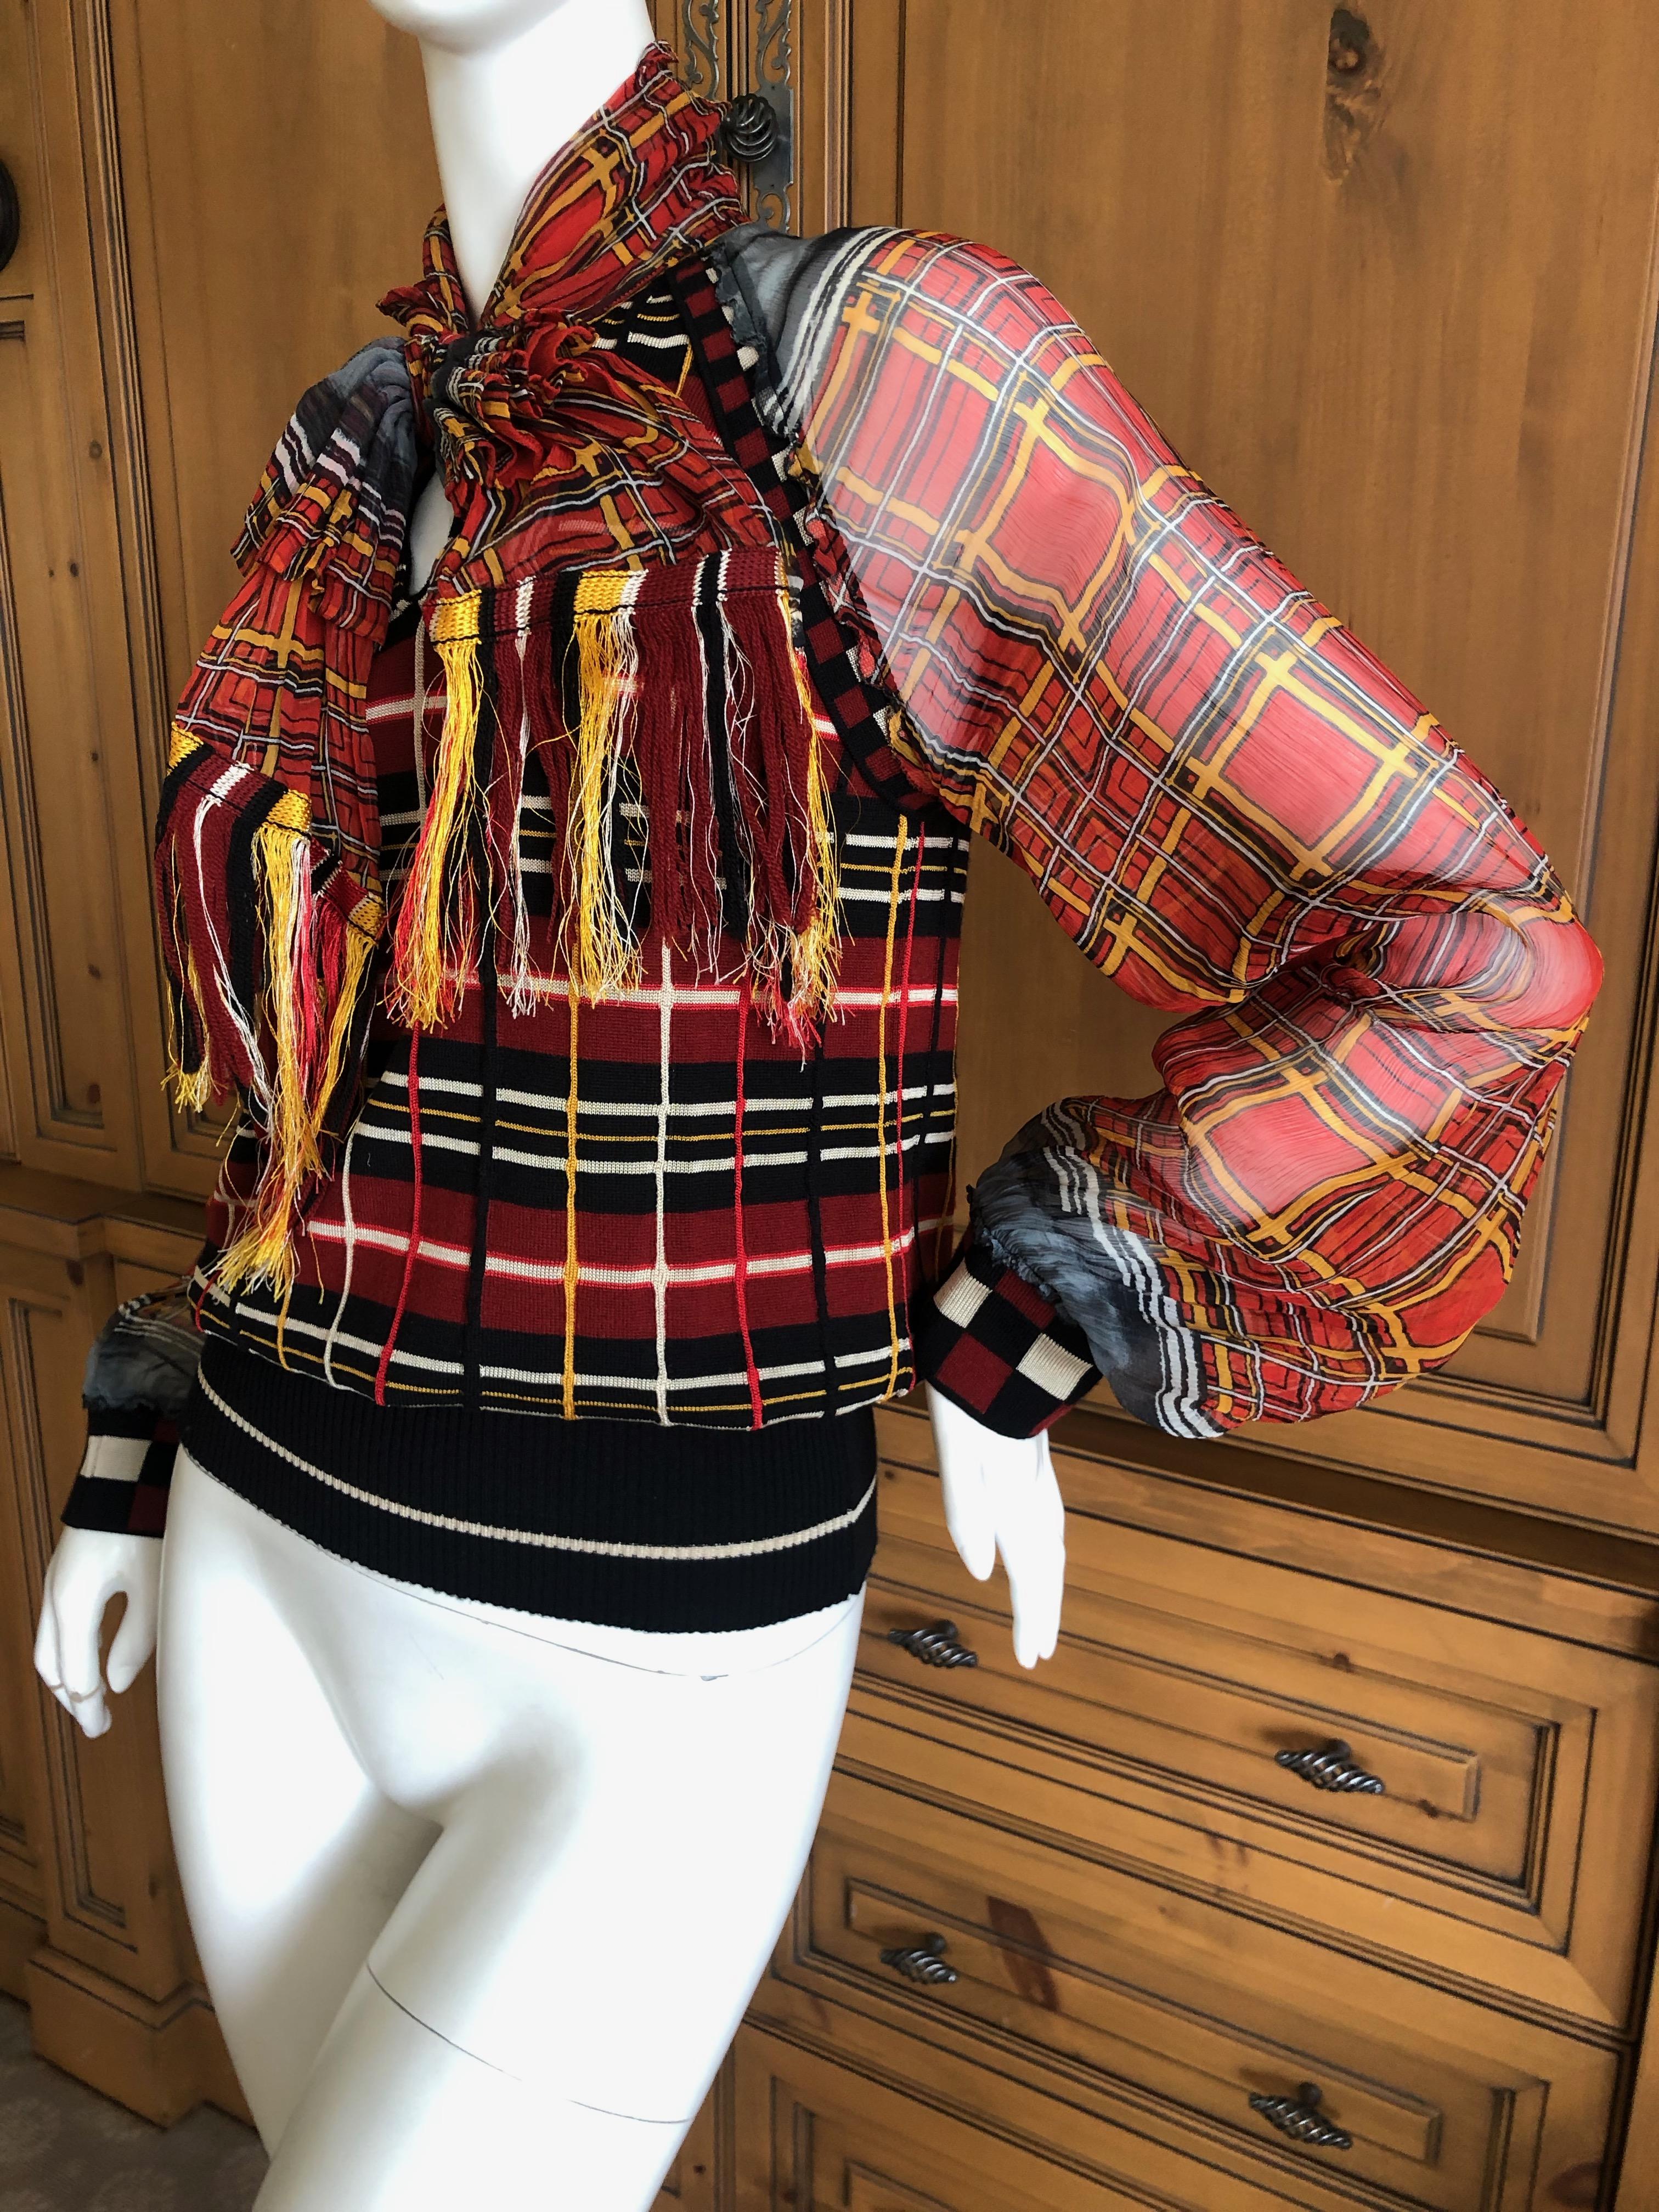 Jean Paul Gaultier Maille Femme 1987 Plaid Top w Sheer Poet Sleeves Fringed Bow 1